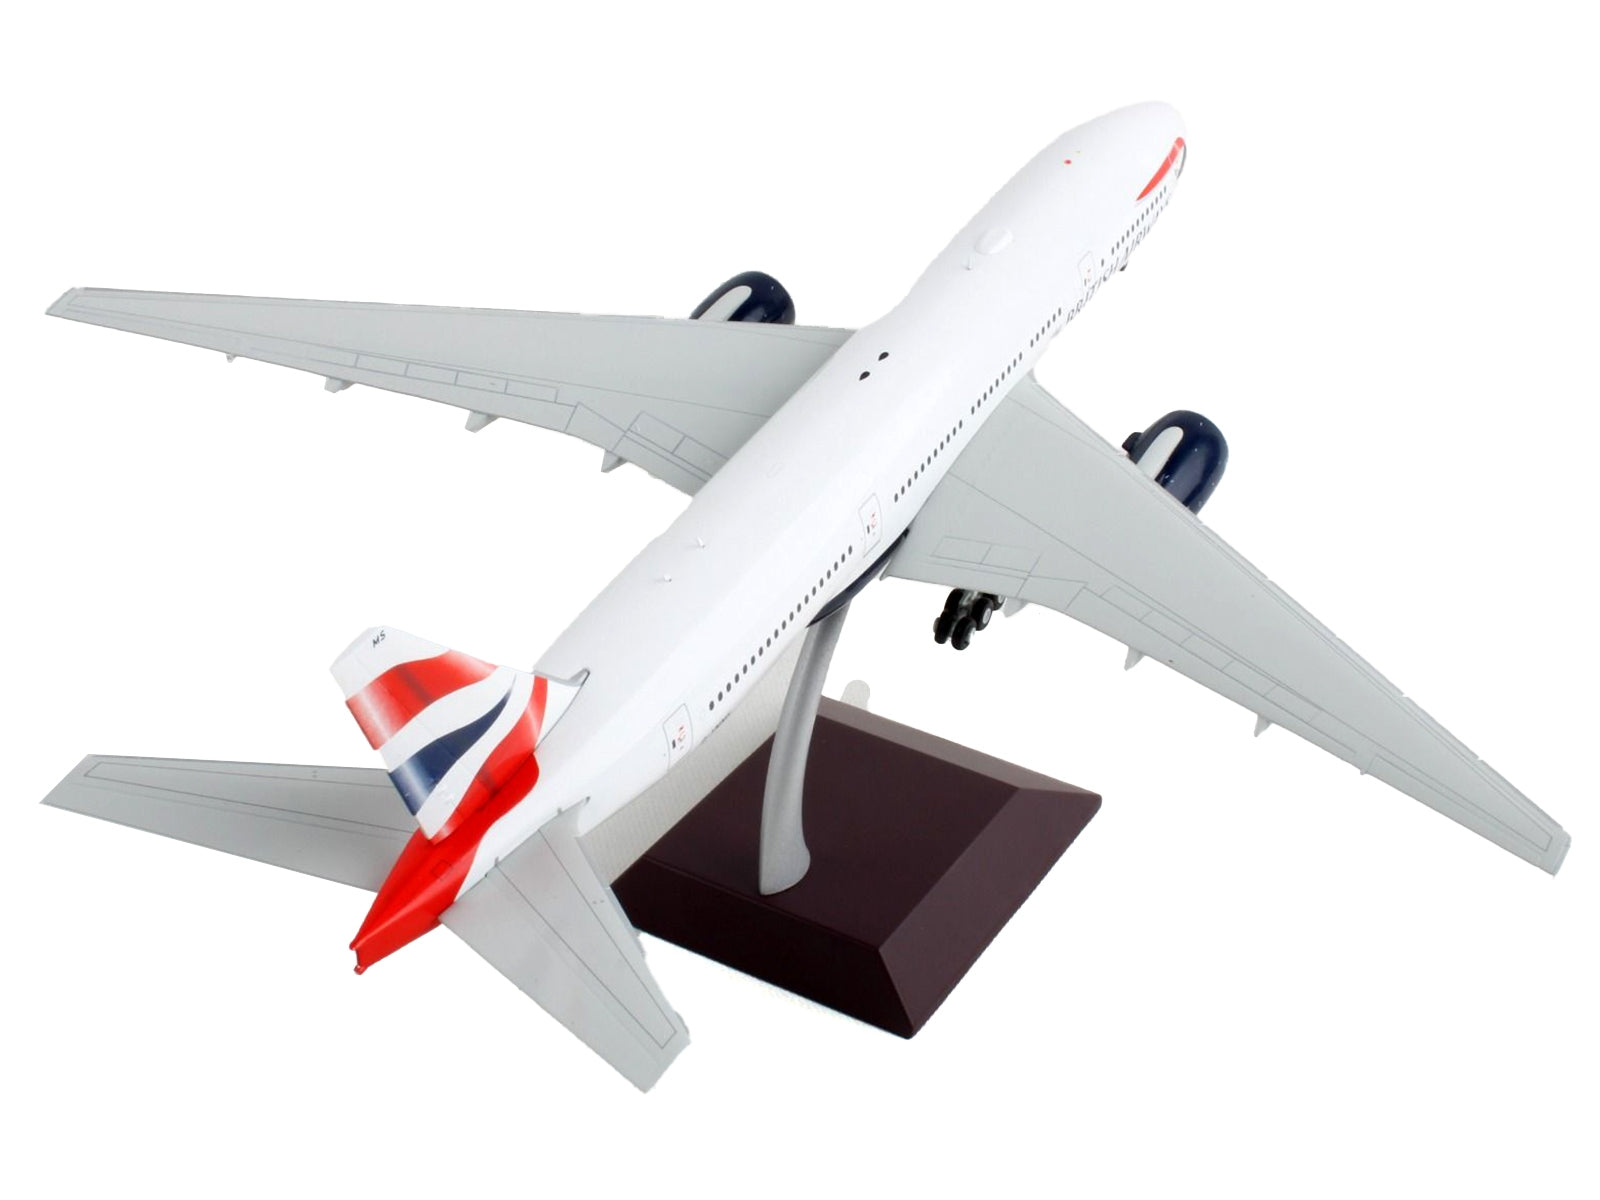 Boeing 777-200ER Commercial Aircraft "British Airways" White with Striped Tail "Gemini 200" Series 1/200 Diecast Model Airplane by GeminiJets